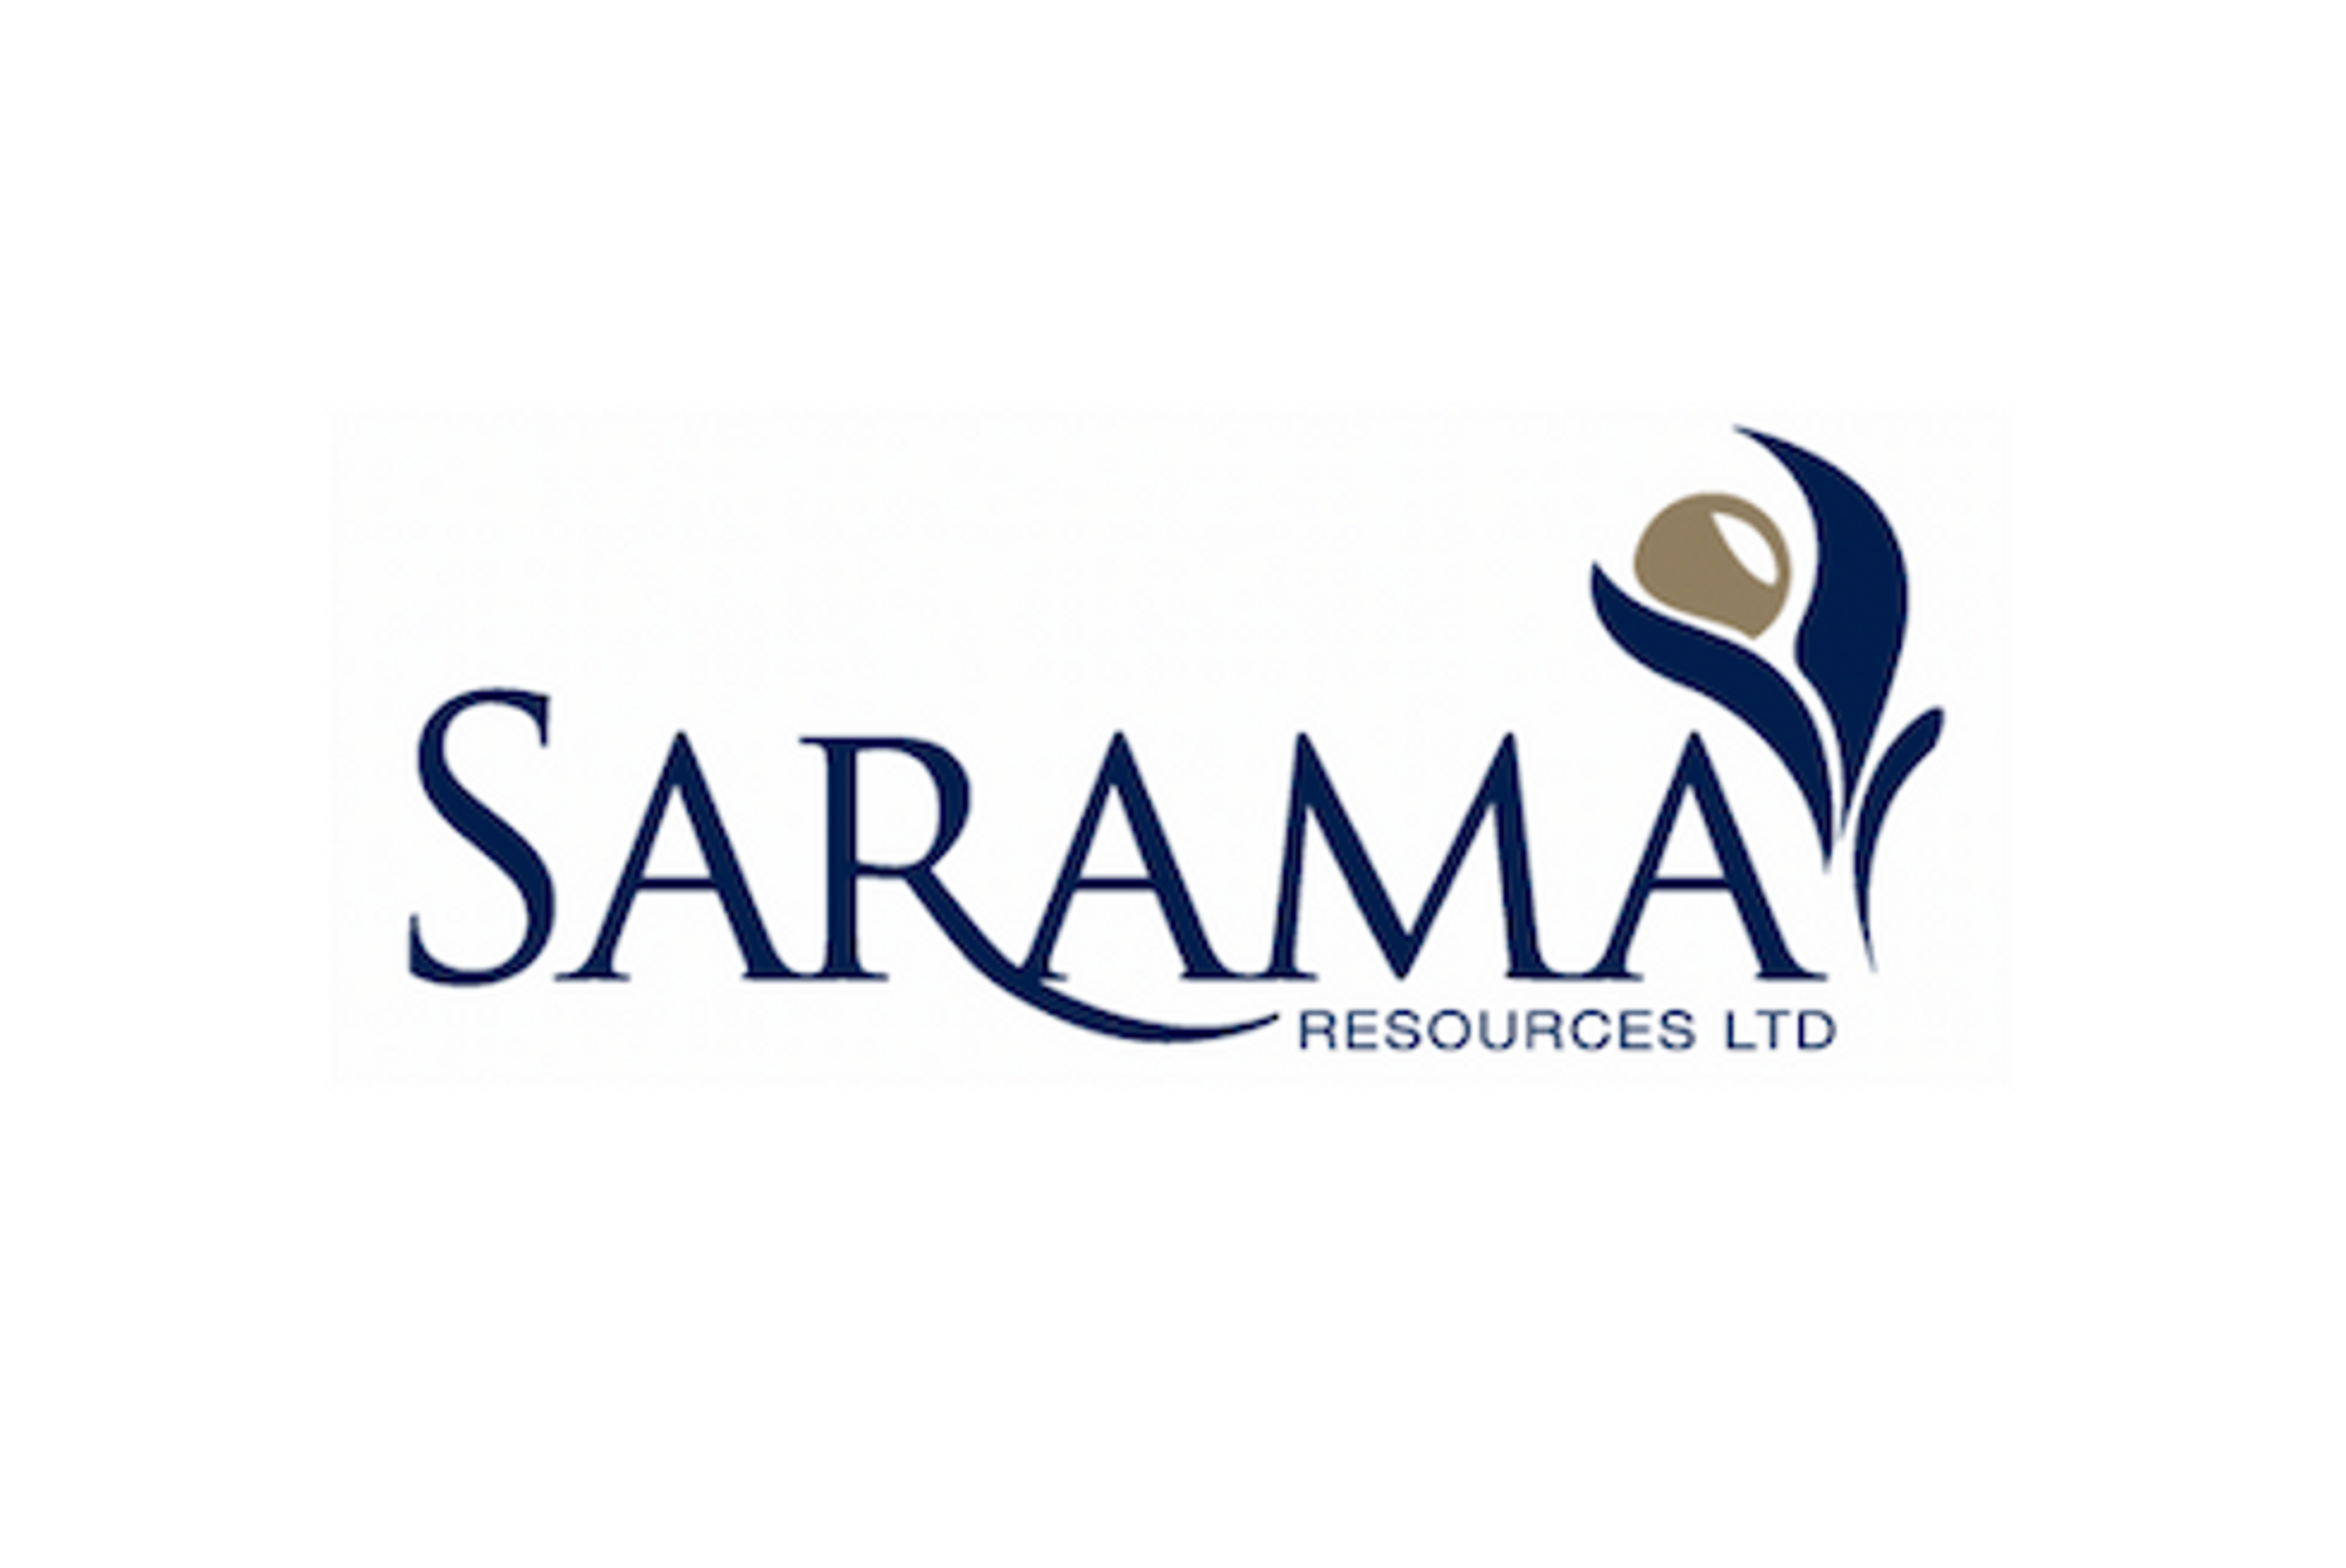 Sarama Resources Provides Update on Dual Listing on the Australian Securities Exchange